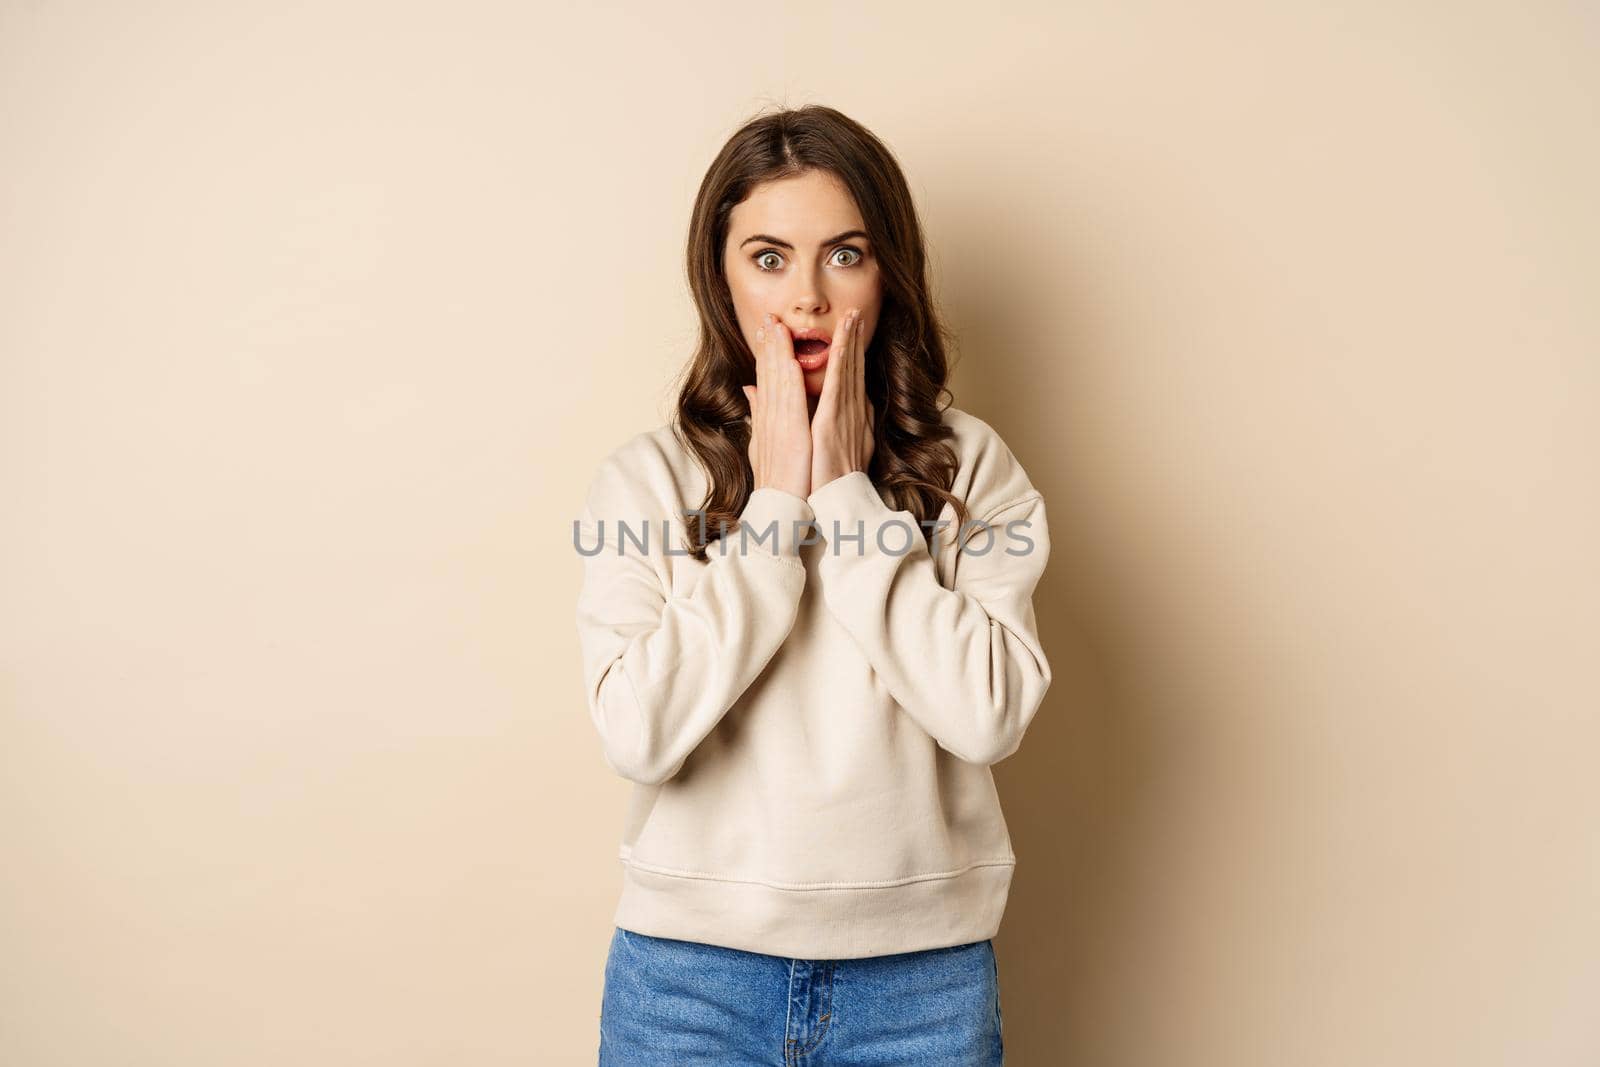 Portrait of shocked brunette woman drop jaw, gasping and staring speechless at camera, beige background. Copy space